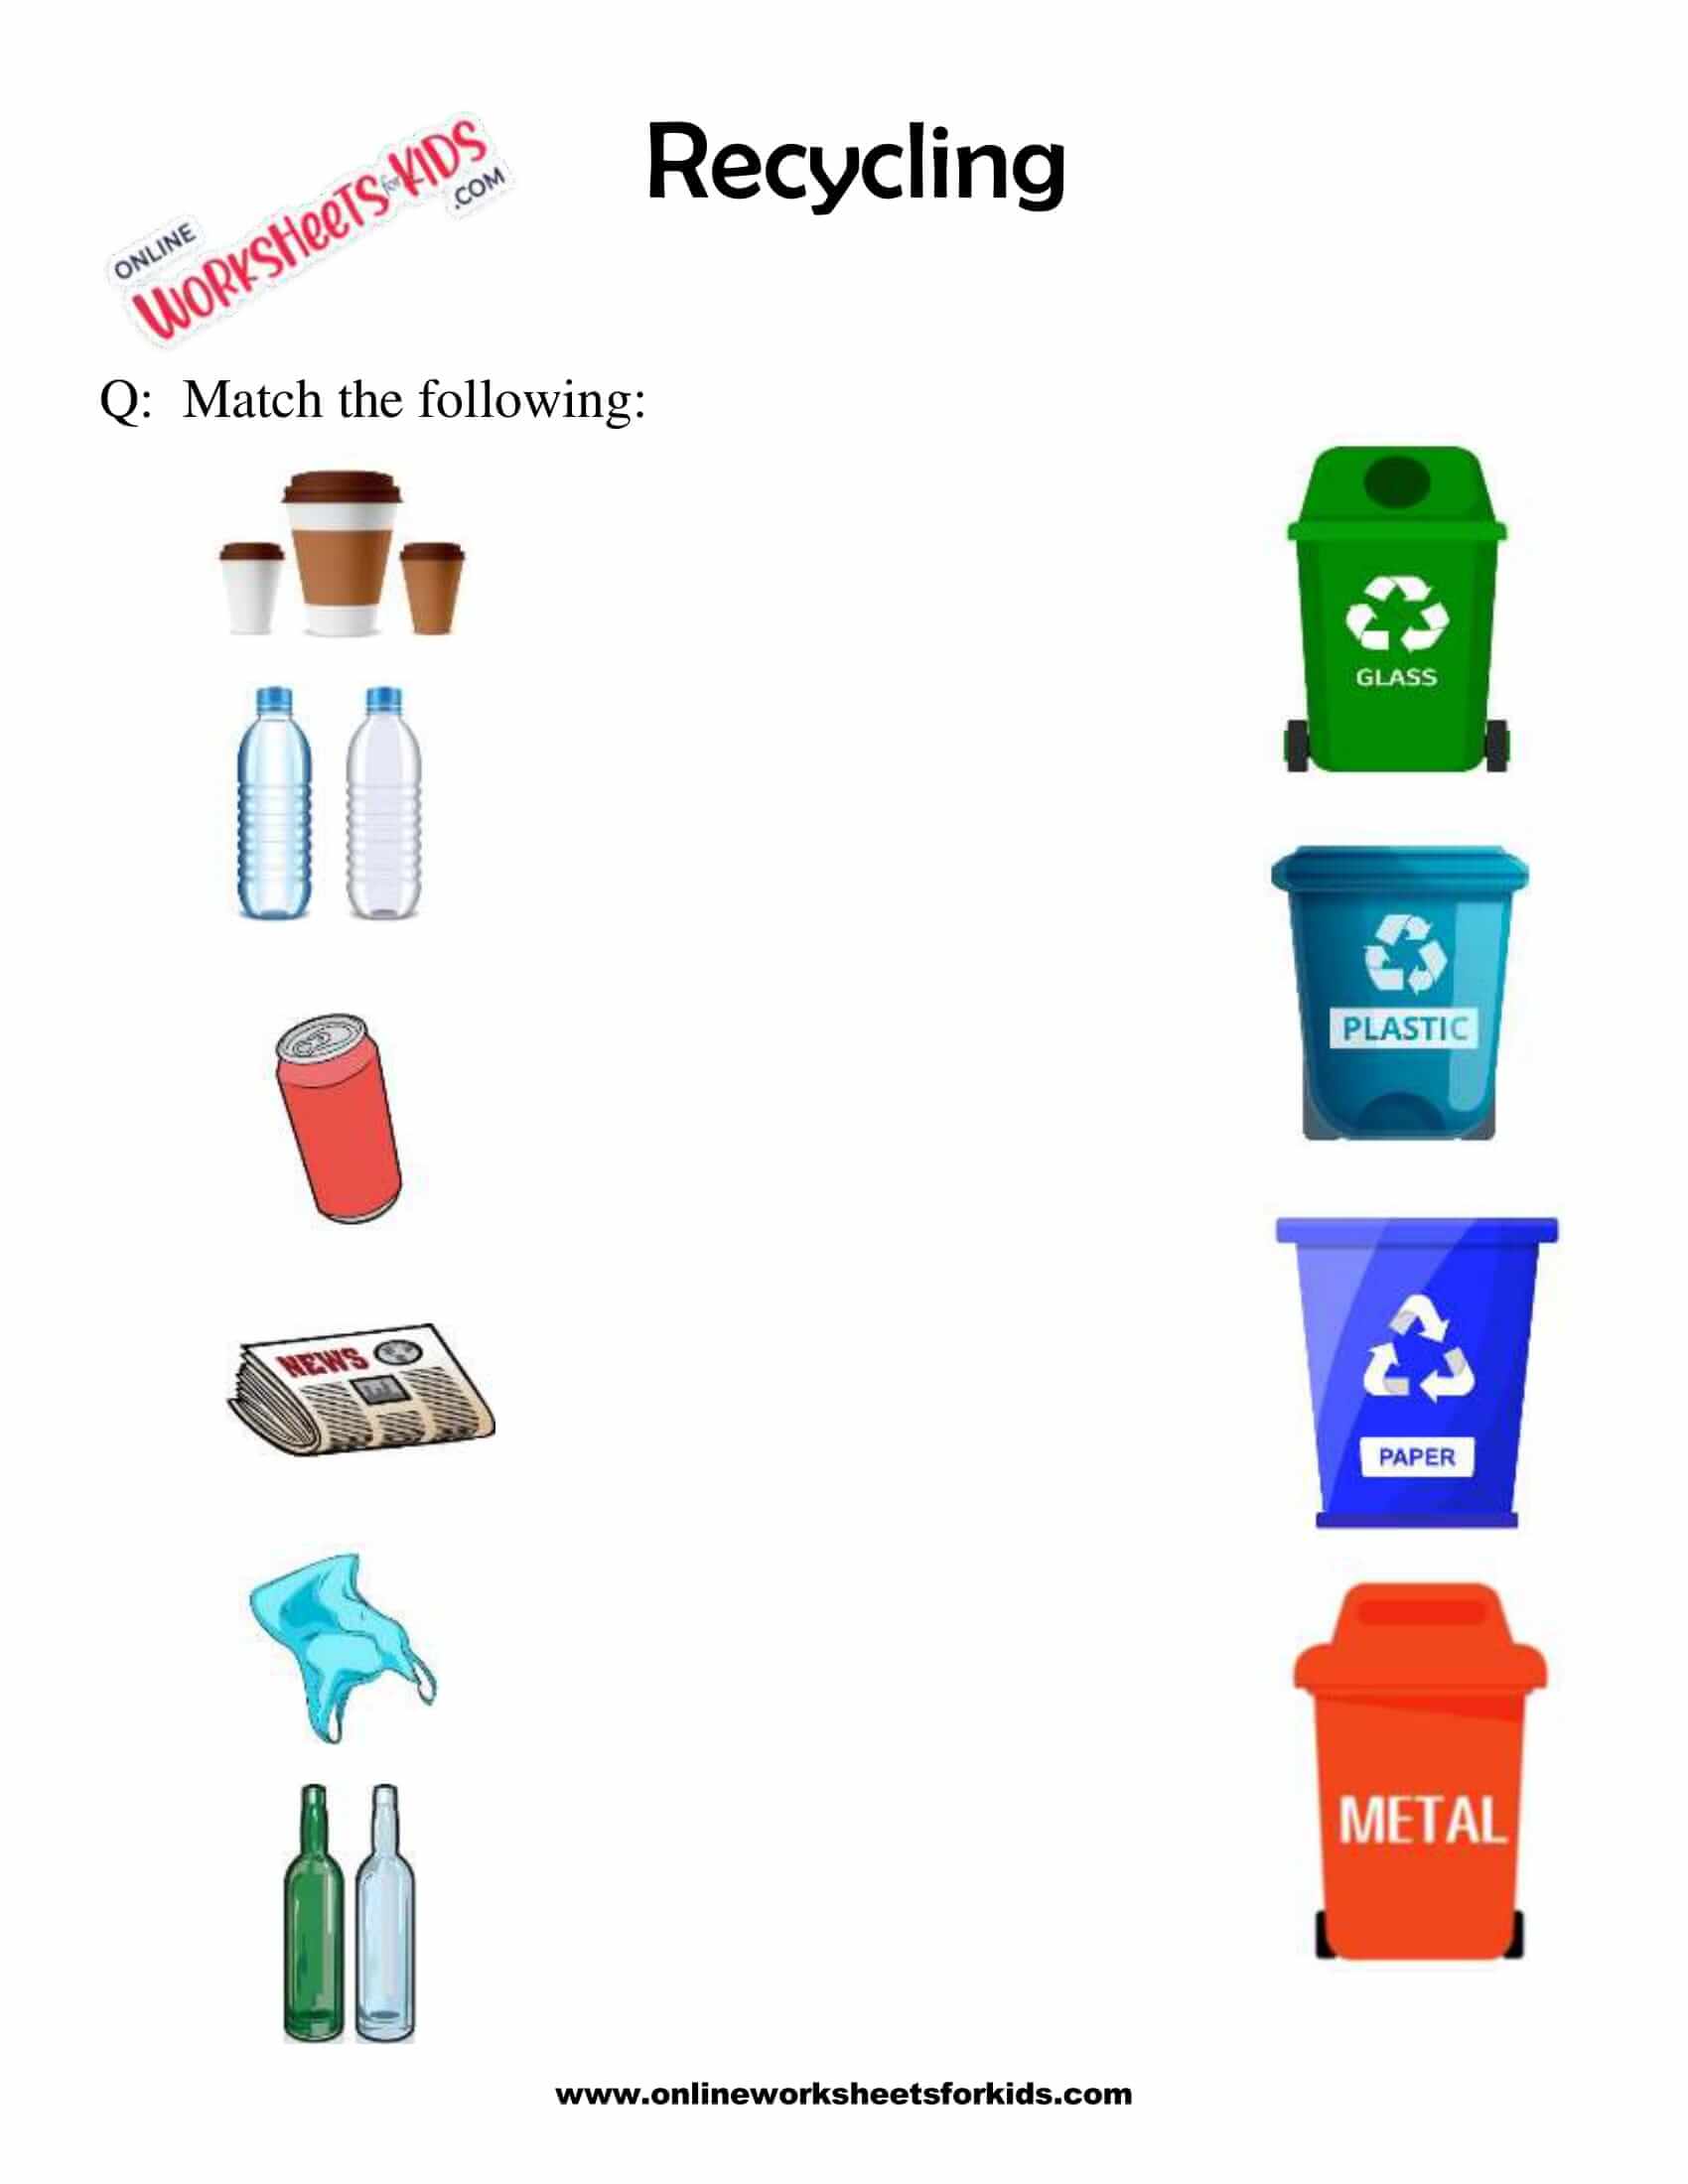 reduce-reuse-recycle-recycling-recycling-information-reduce-reuse